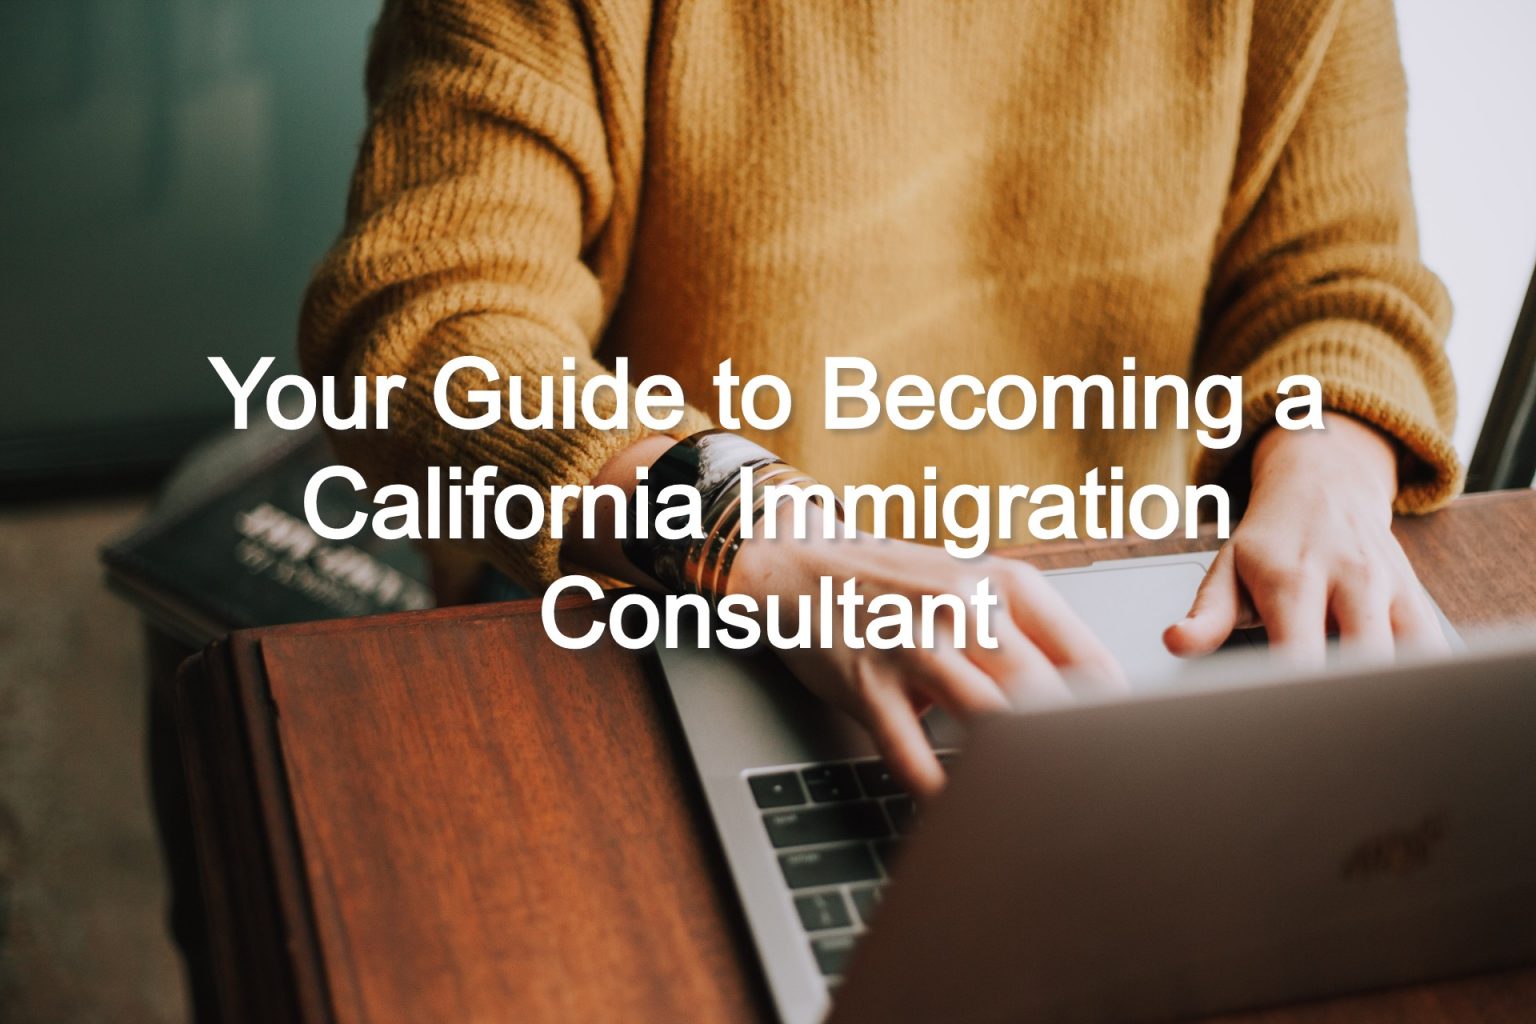 Your Guide to a California Immigration Consultant 2022